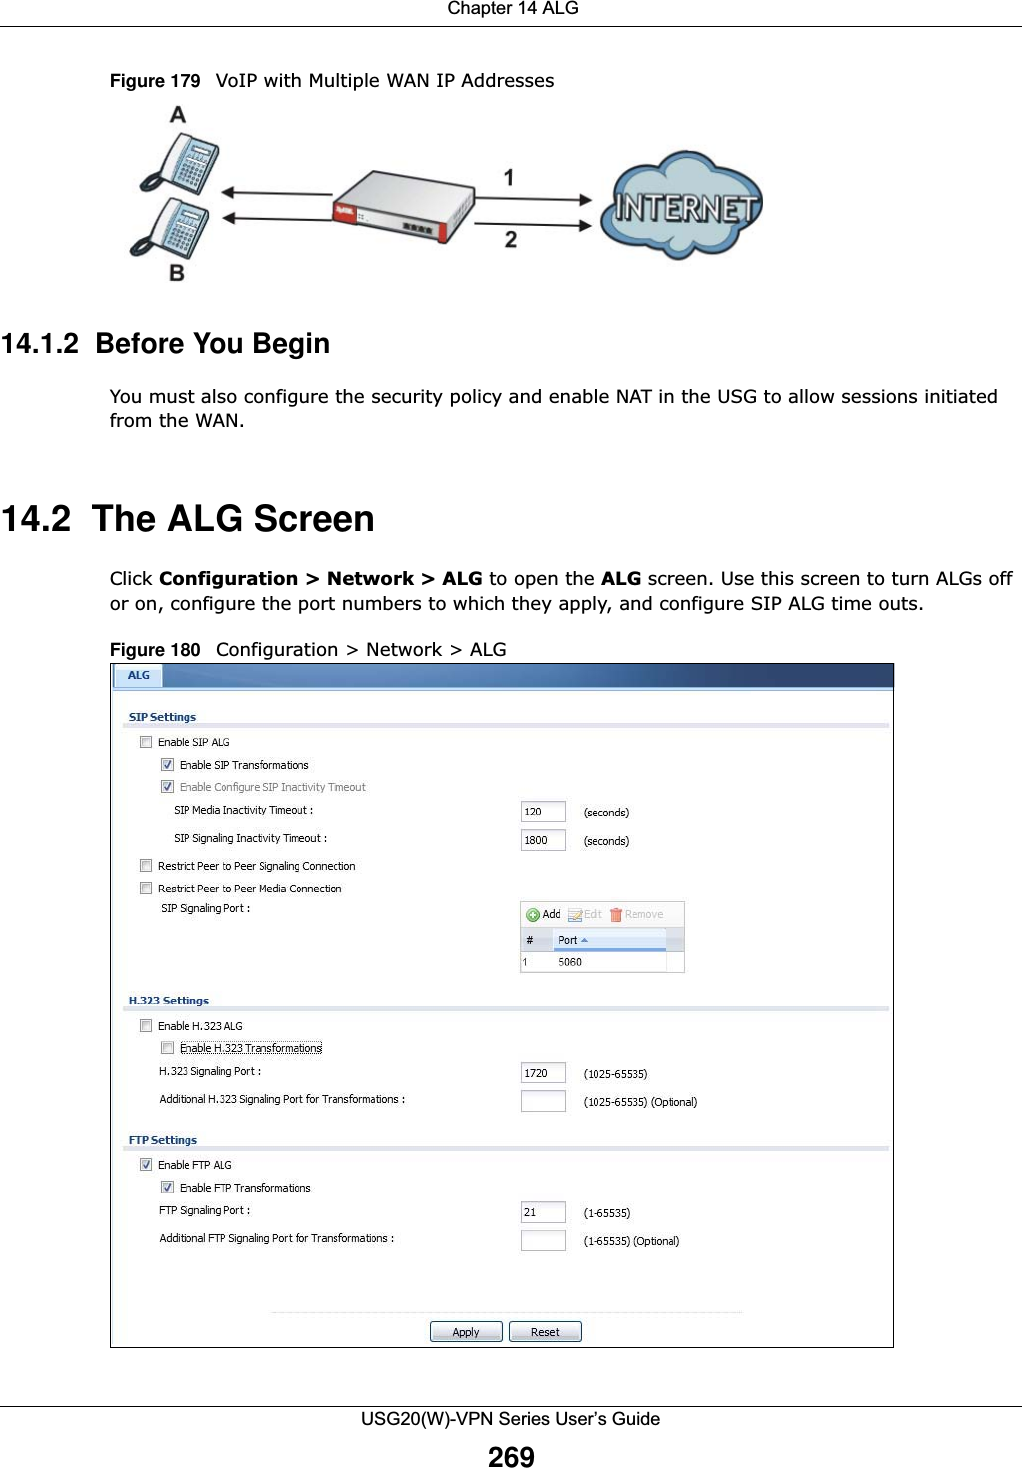  Chapter 14 ALGUSG20(W)-VPN Series User’s Guide269Figure 179   VoIP with Multiple WAN IP Addresses14.1.2  Before You BeginYou must also configure the security policy and enable NAT in the USG to allow sessions initiated from the WAN.14.2  The ALG Screen Click Configuration &gt; Network &gt; ALG to open the ALG screen. Use this screen to turn ALGs off or on, configure the port numbers to which they apply, and configure SIP ALG time outs. Figure 180   Configuration &gt; Network &gt; ALG  